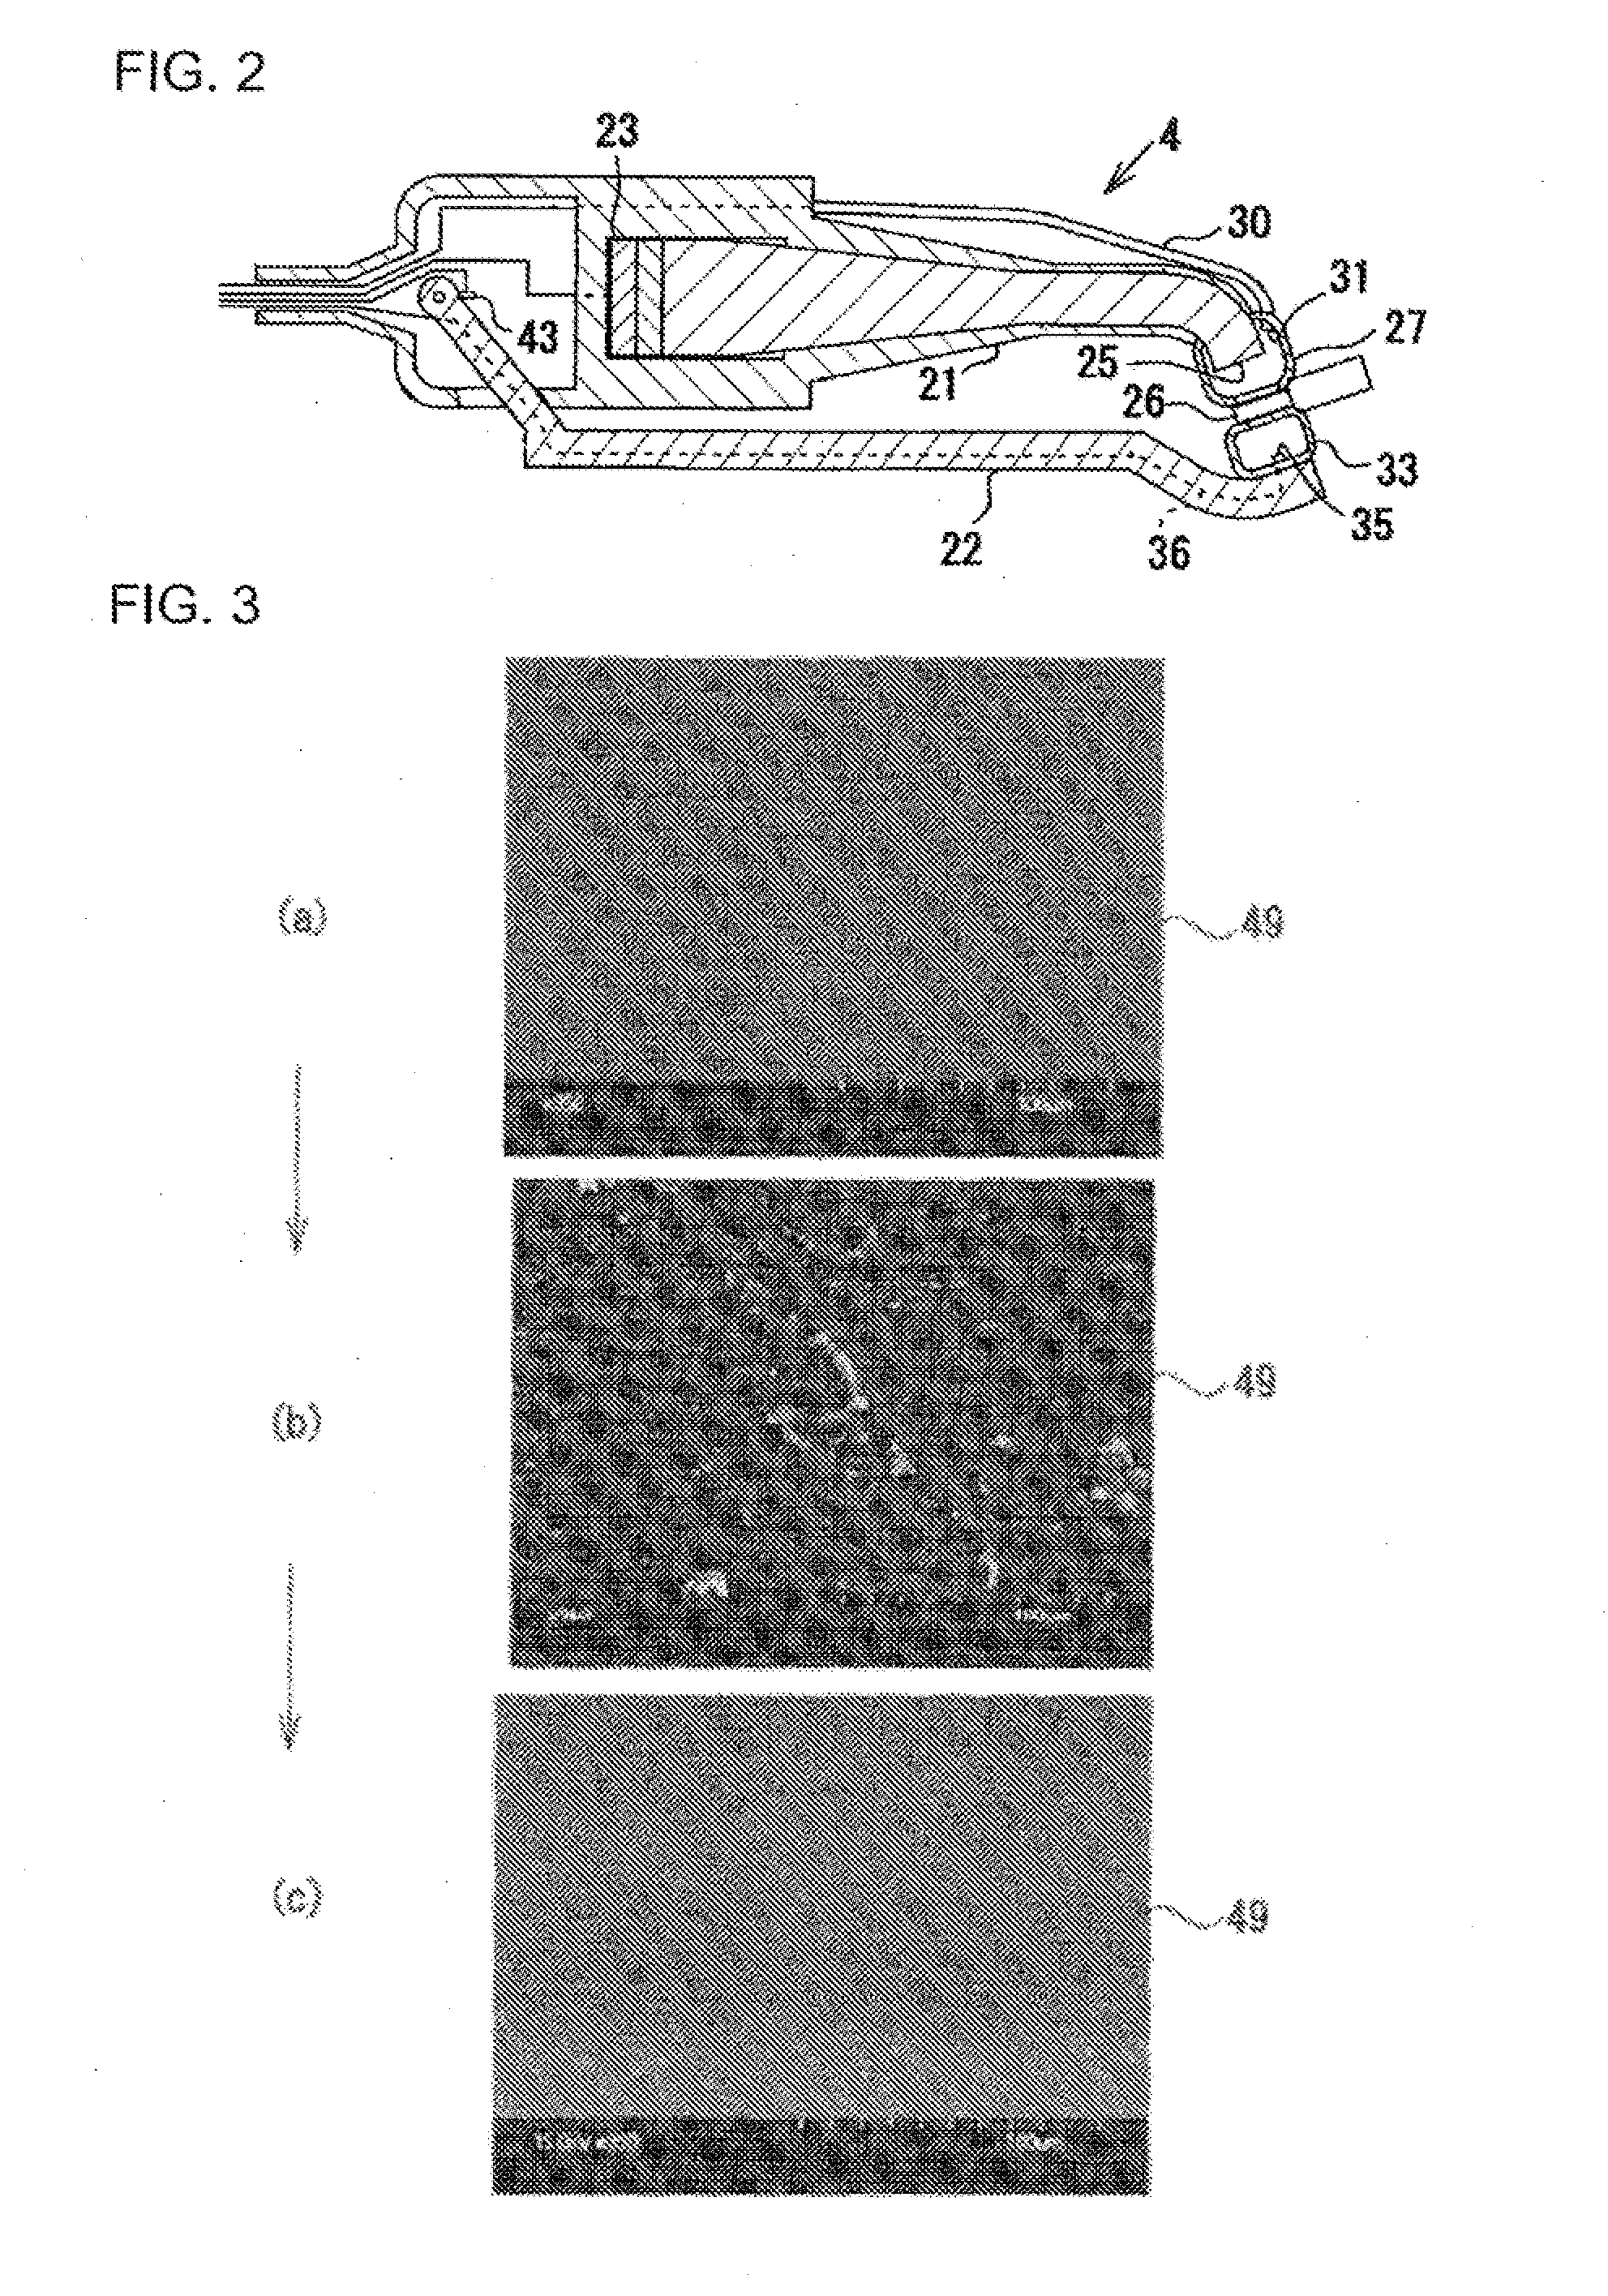 Dental ultrasonic cleaning device and method for cleaning teeth or dentures by using ultrasonic waves